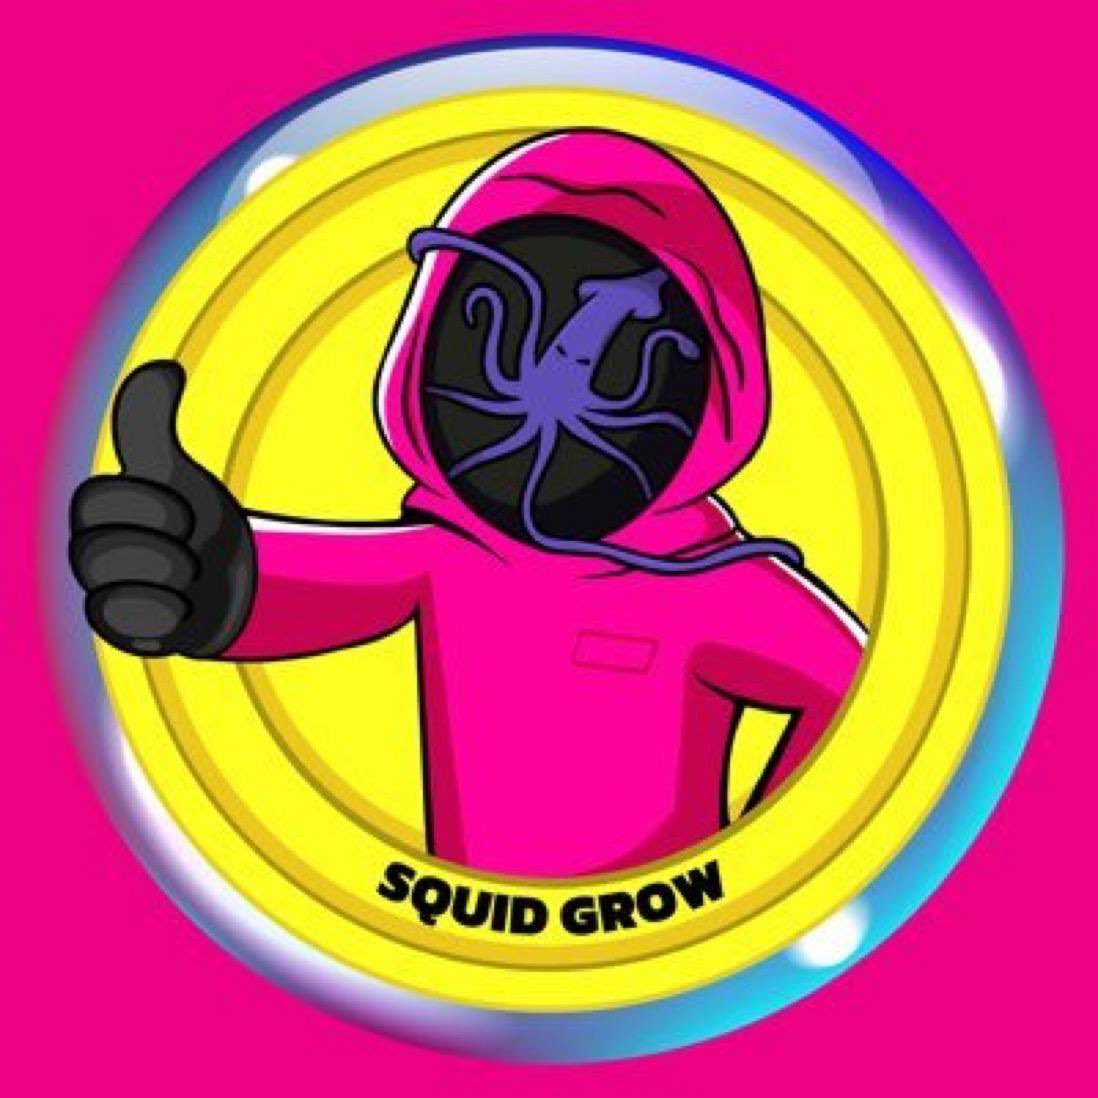 Crypto will retire you financially this year. #SquidGrow #SquidGrowTakeOver Year of Utilities